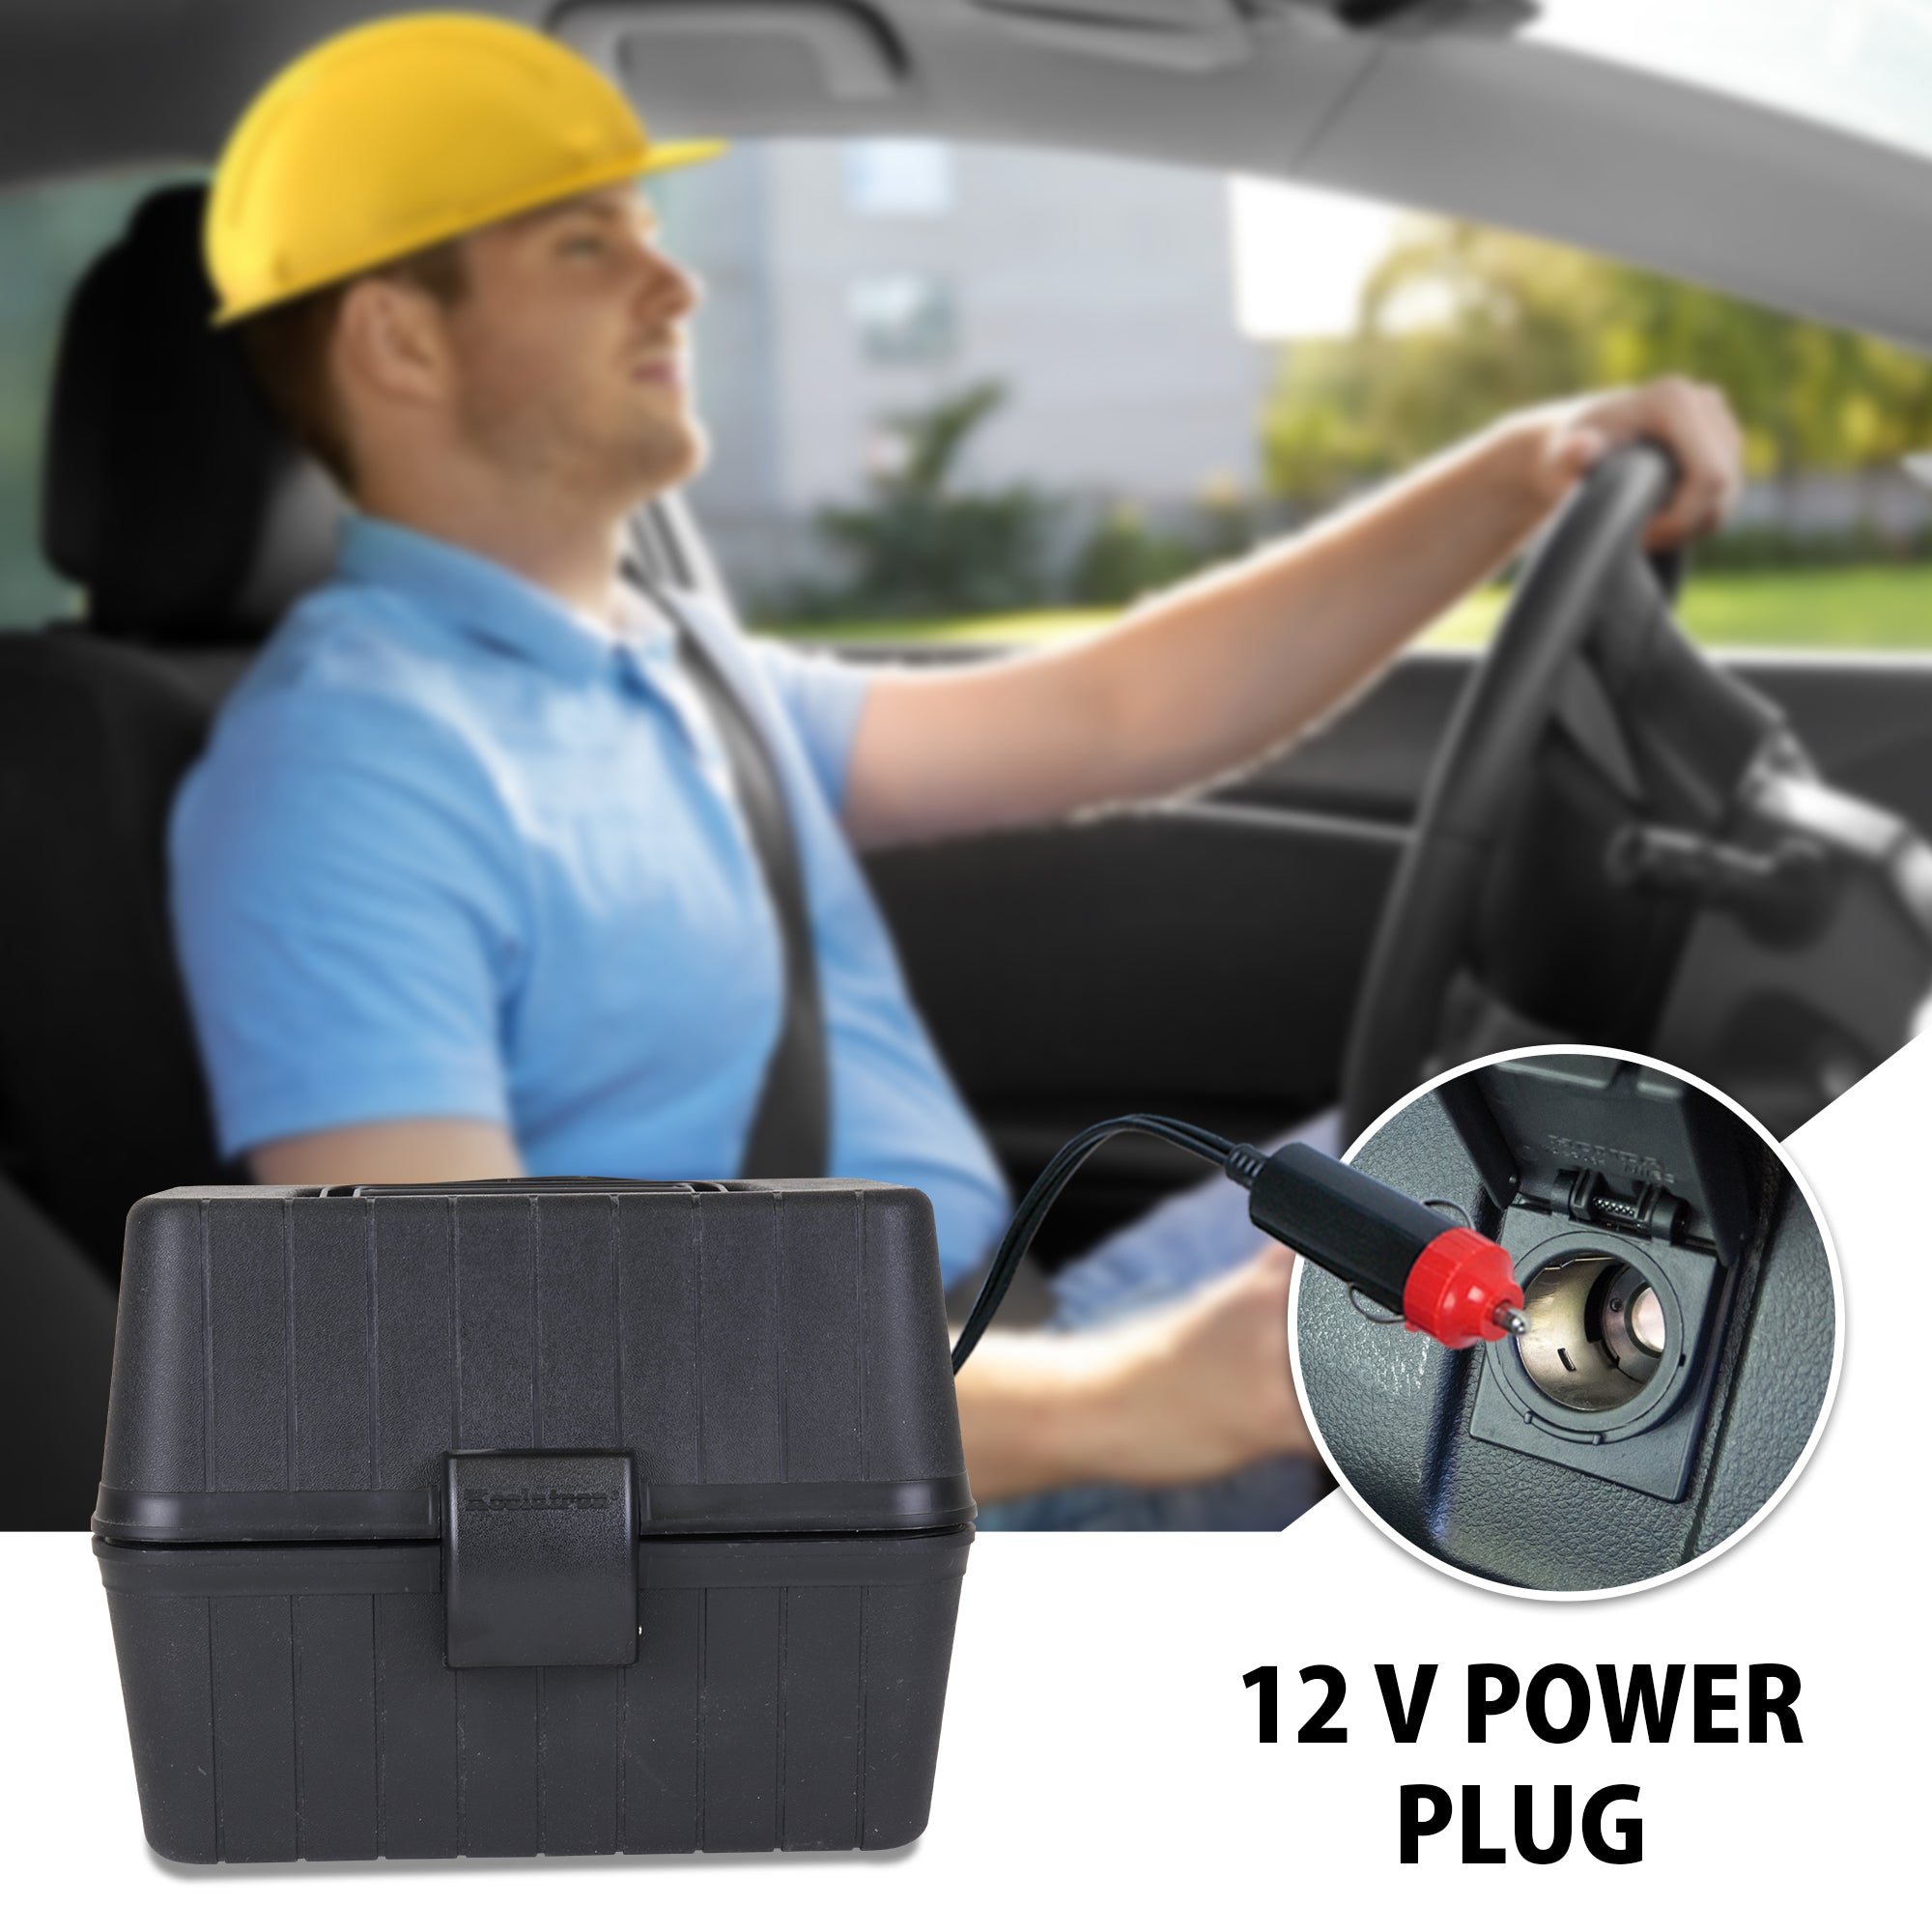 Product shot of 12V lunch box with inset closeup of 12V cord plugged in and text below reading, "12V power plug." In the background is a lifestyle image of a person with light skin wearing a light blue t-shirt and yellow construction hat in the driver's seat of a dark colored vehicle